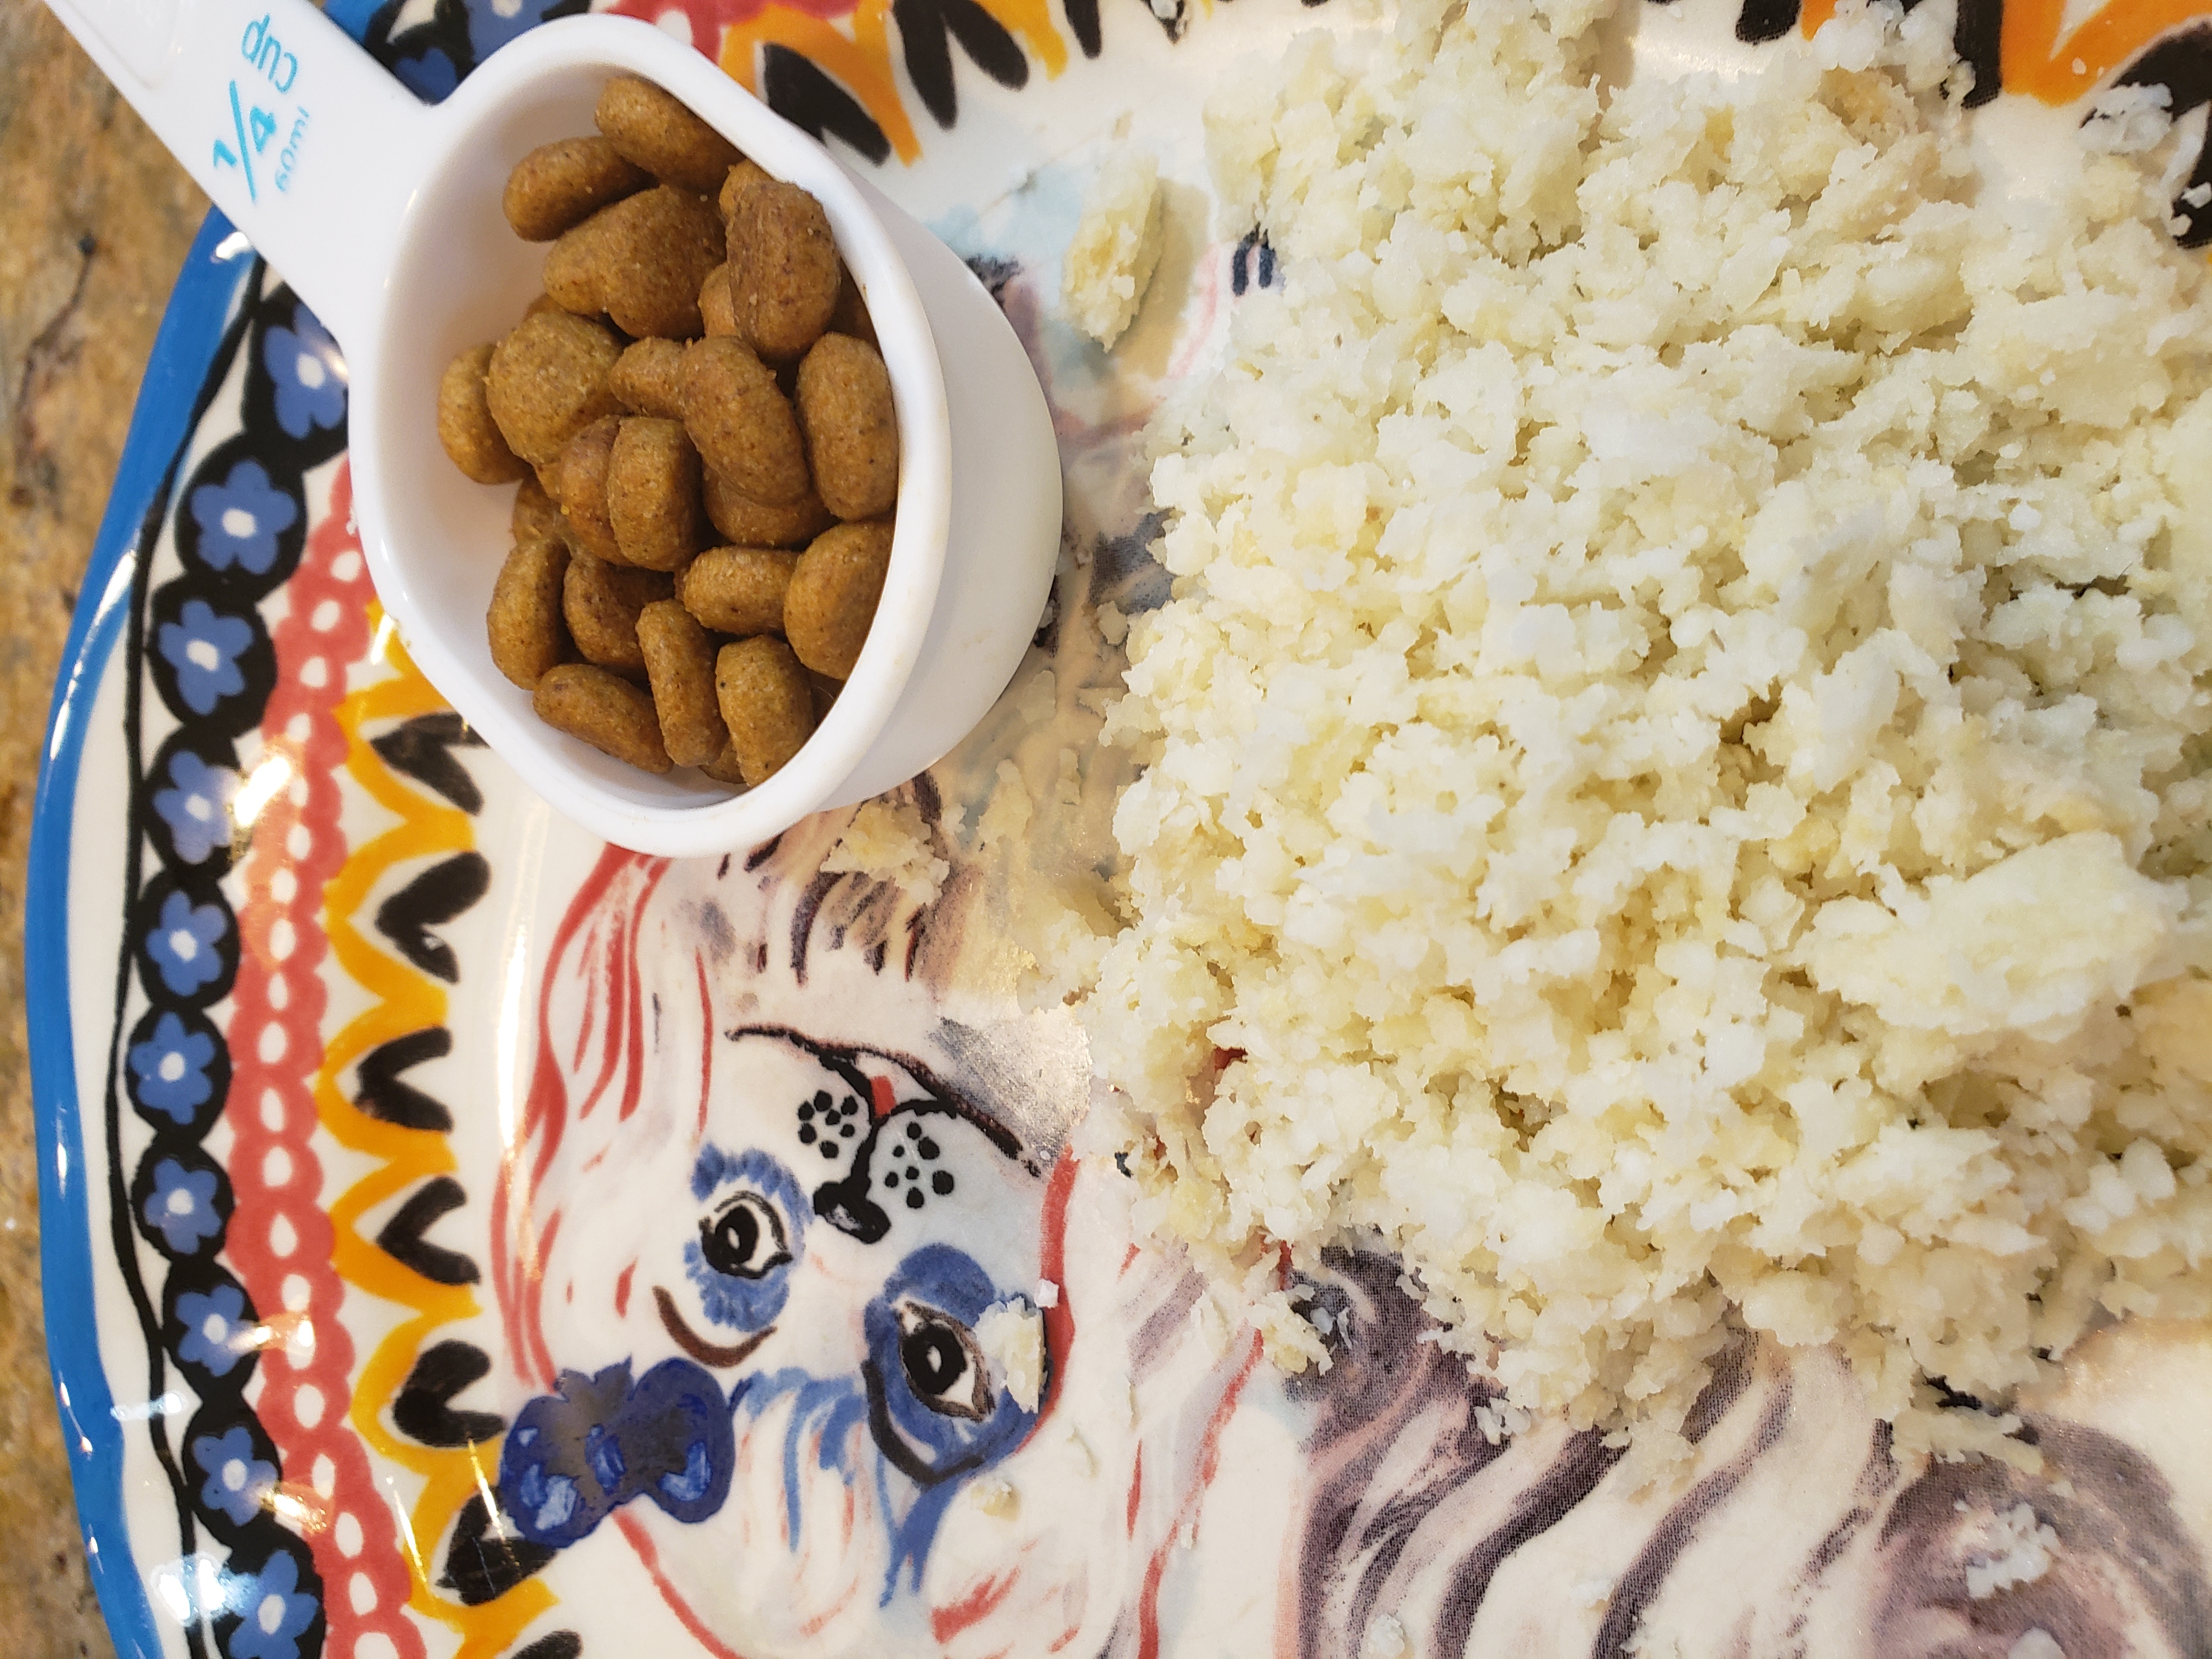 what does white rice do for dogs